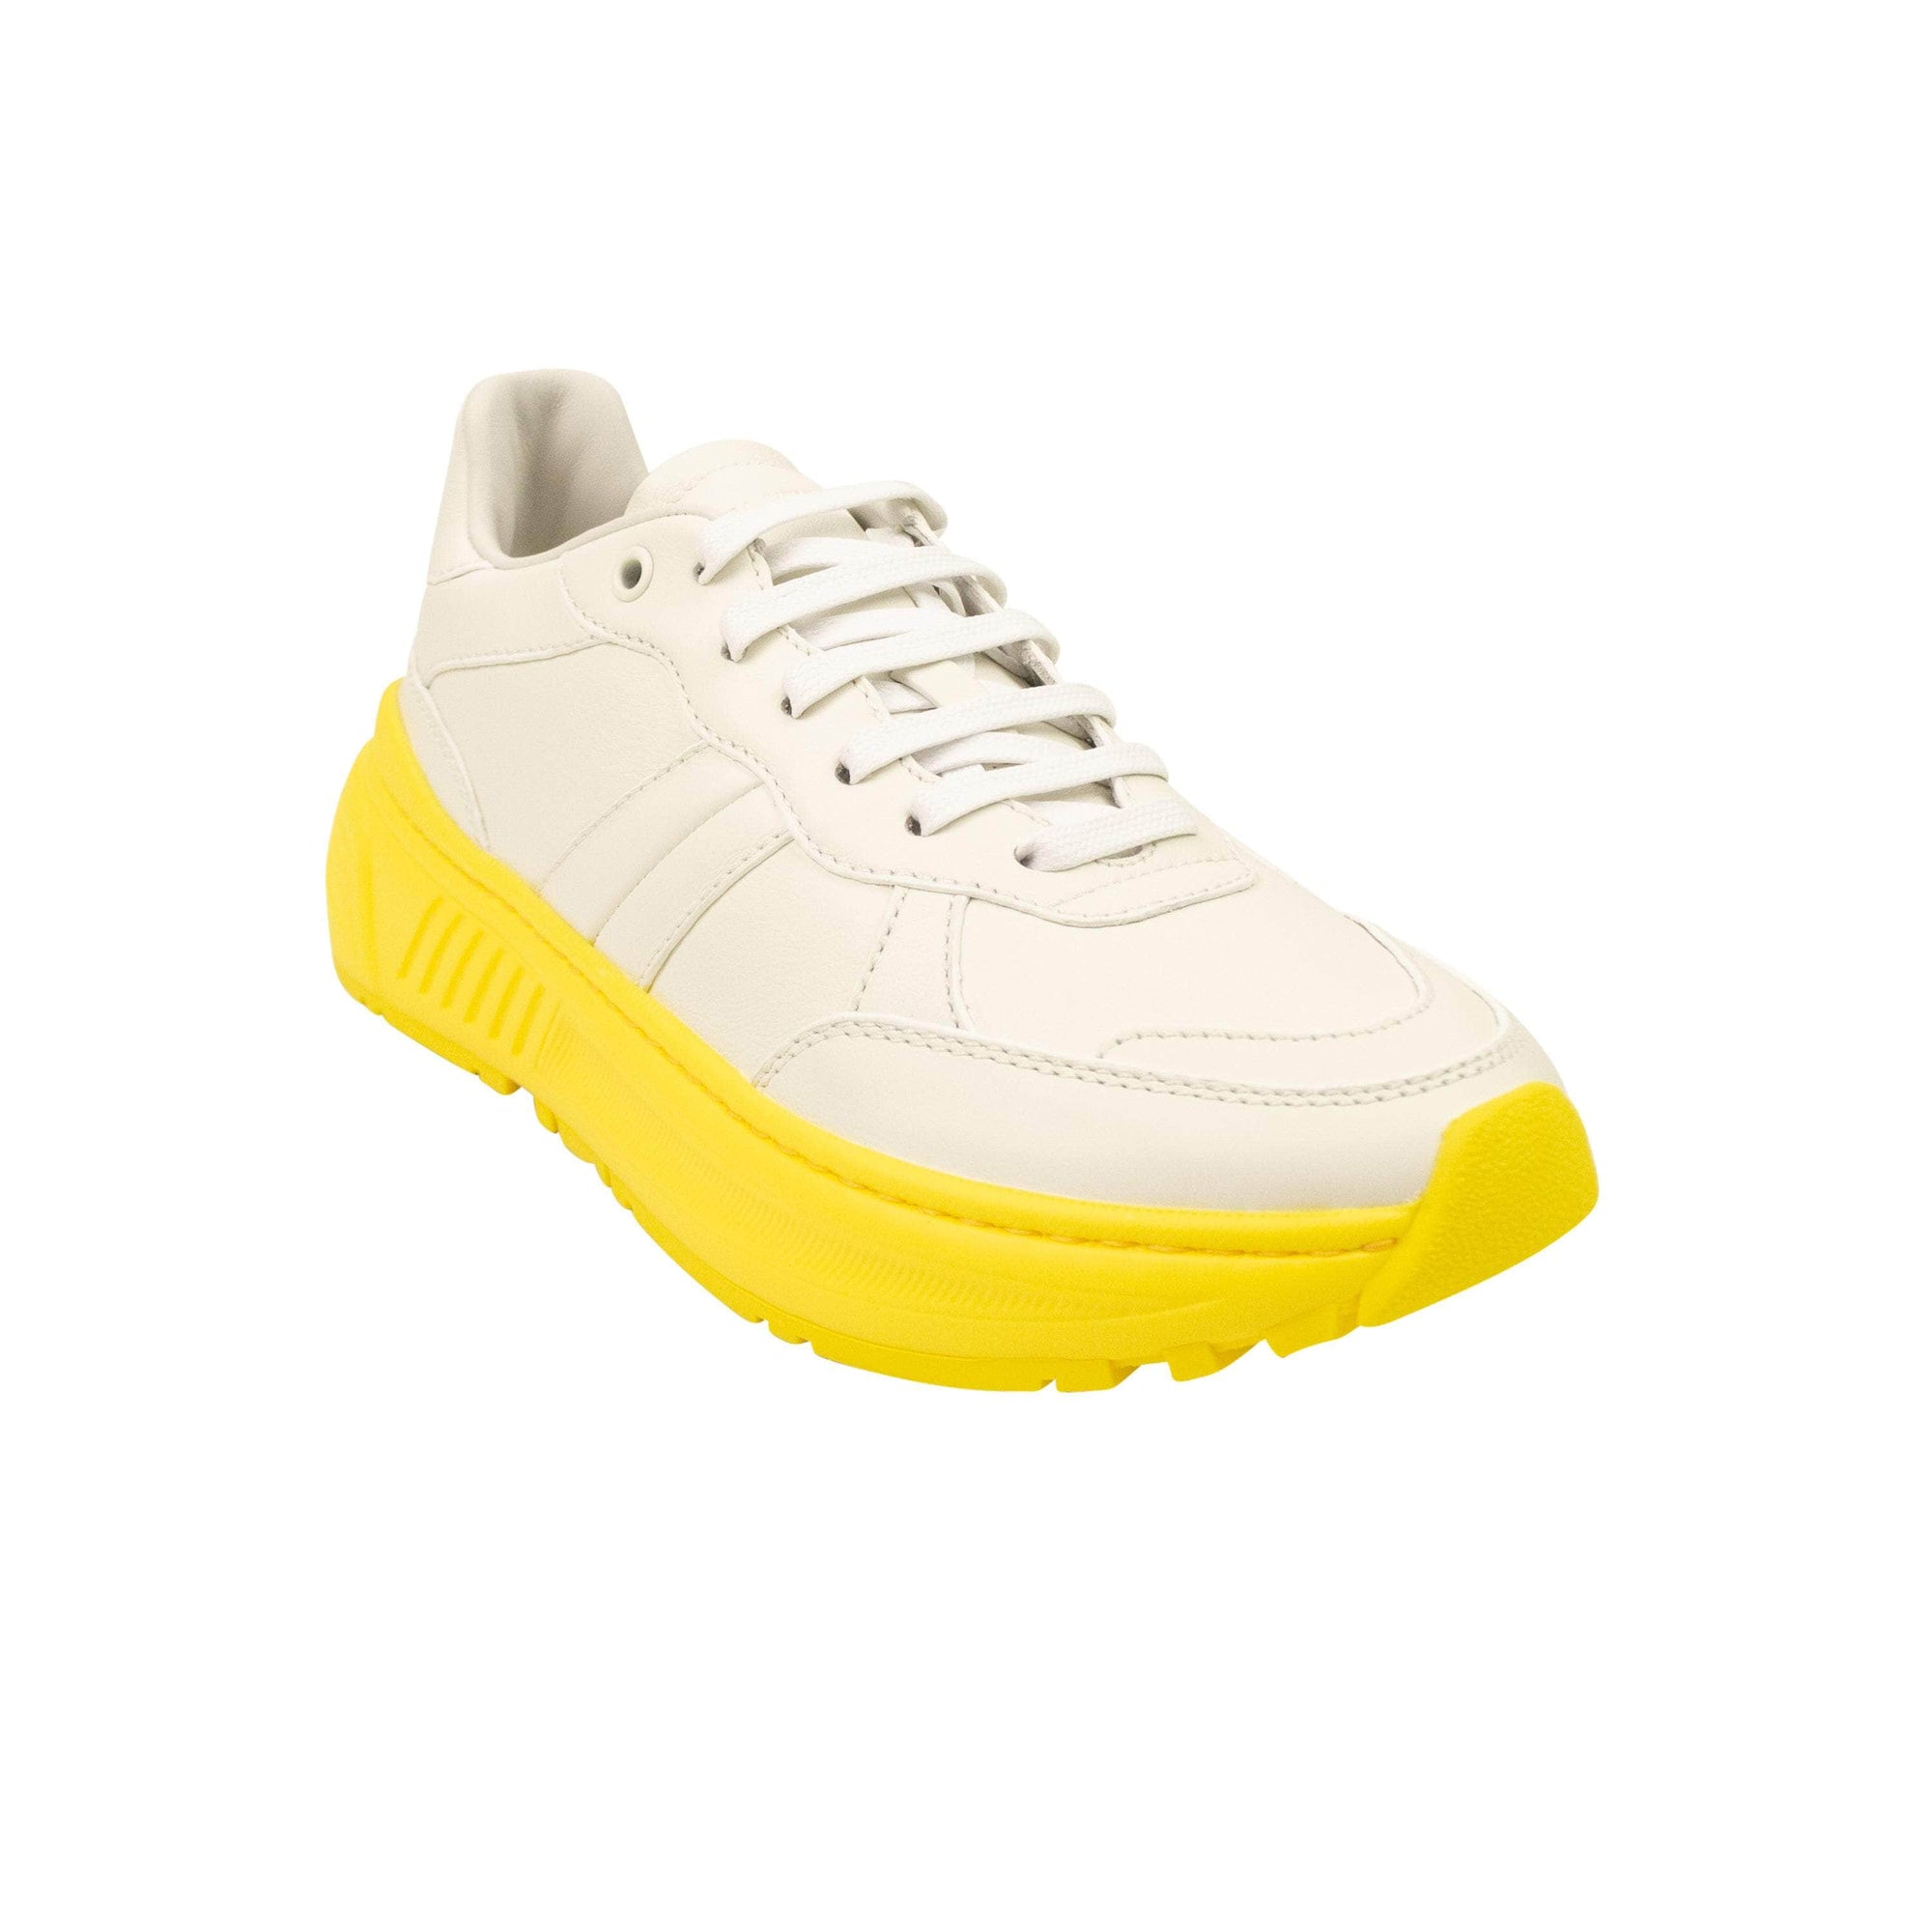 Bottega Veneta channelenable-all, chicmi, couponcollection, gender-mens, main-shoes White And Yellow Leather Speedster Sneakers